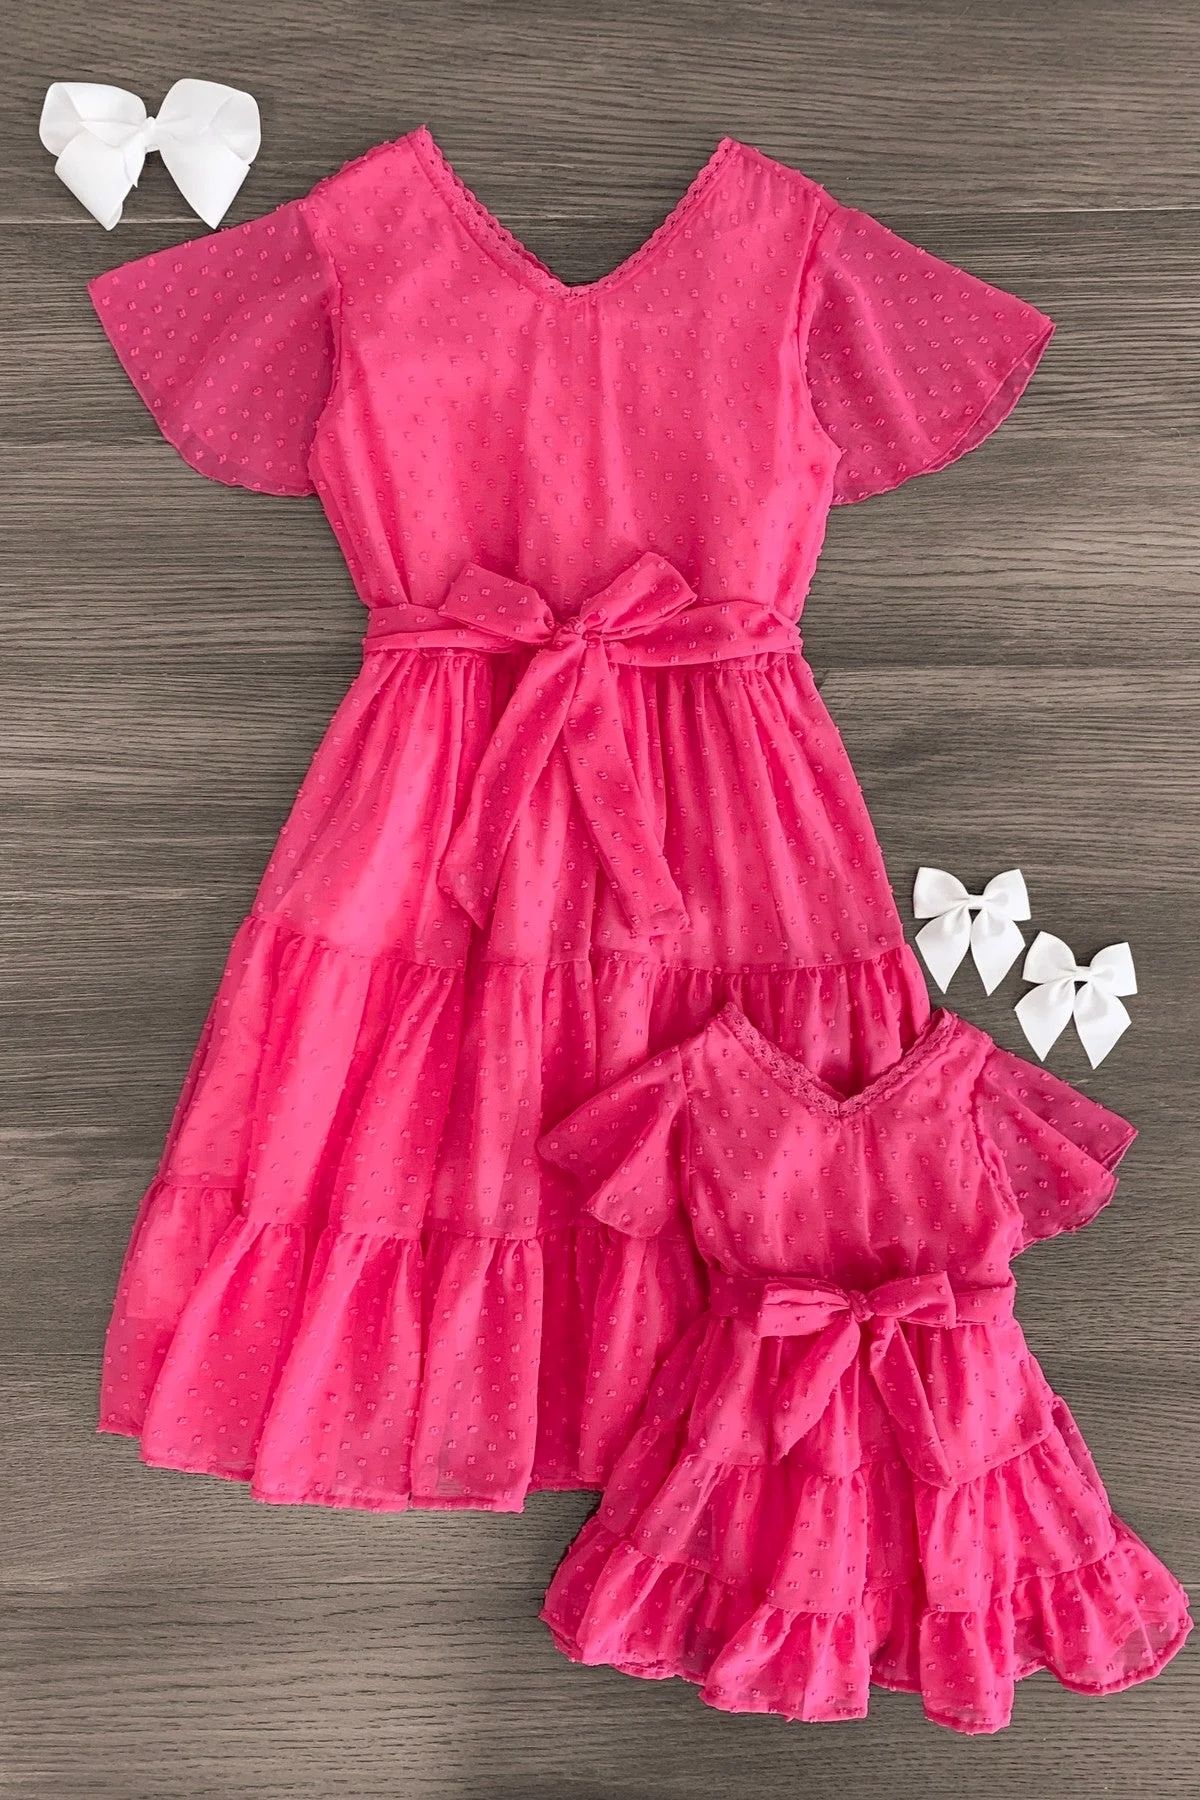 Mom & Me - Hot Pink Swiss Dot Dress | Sparkle In Pink